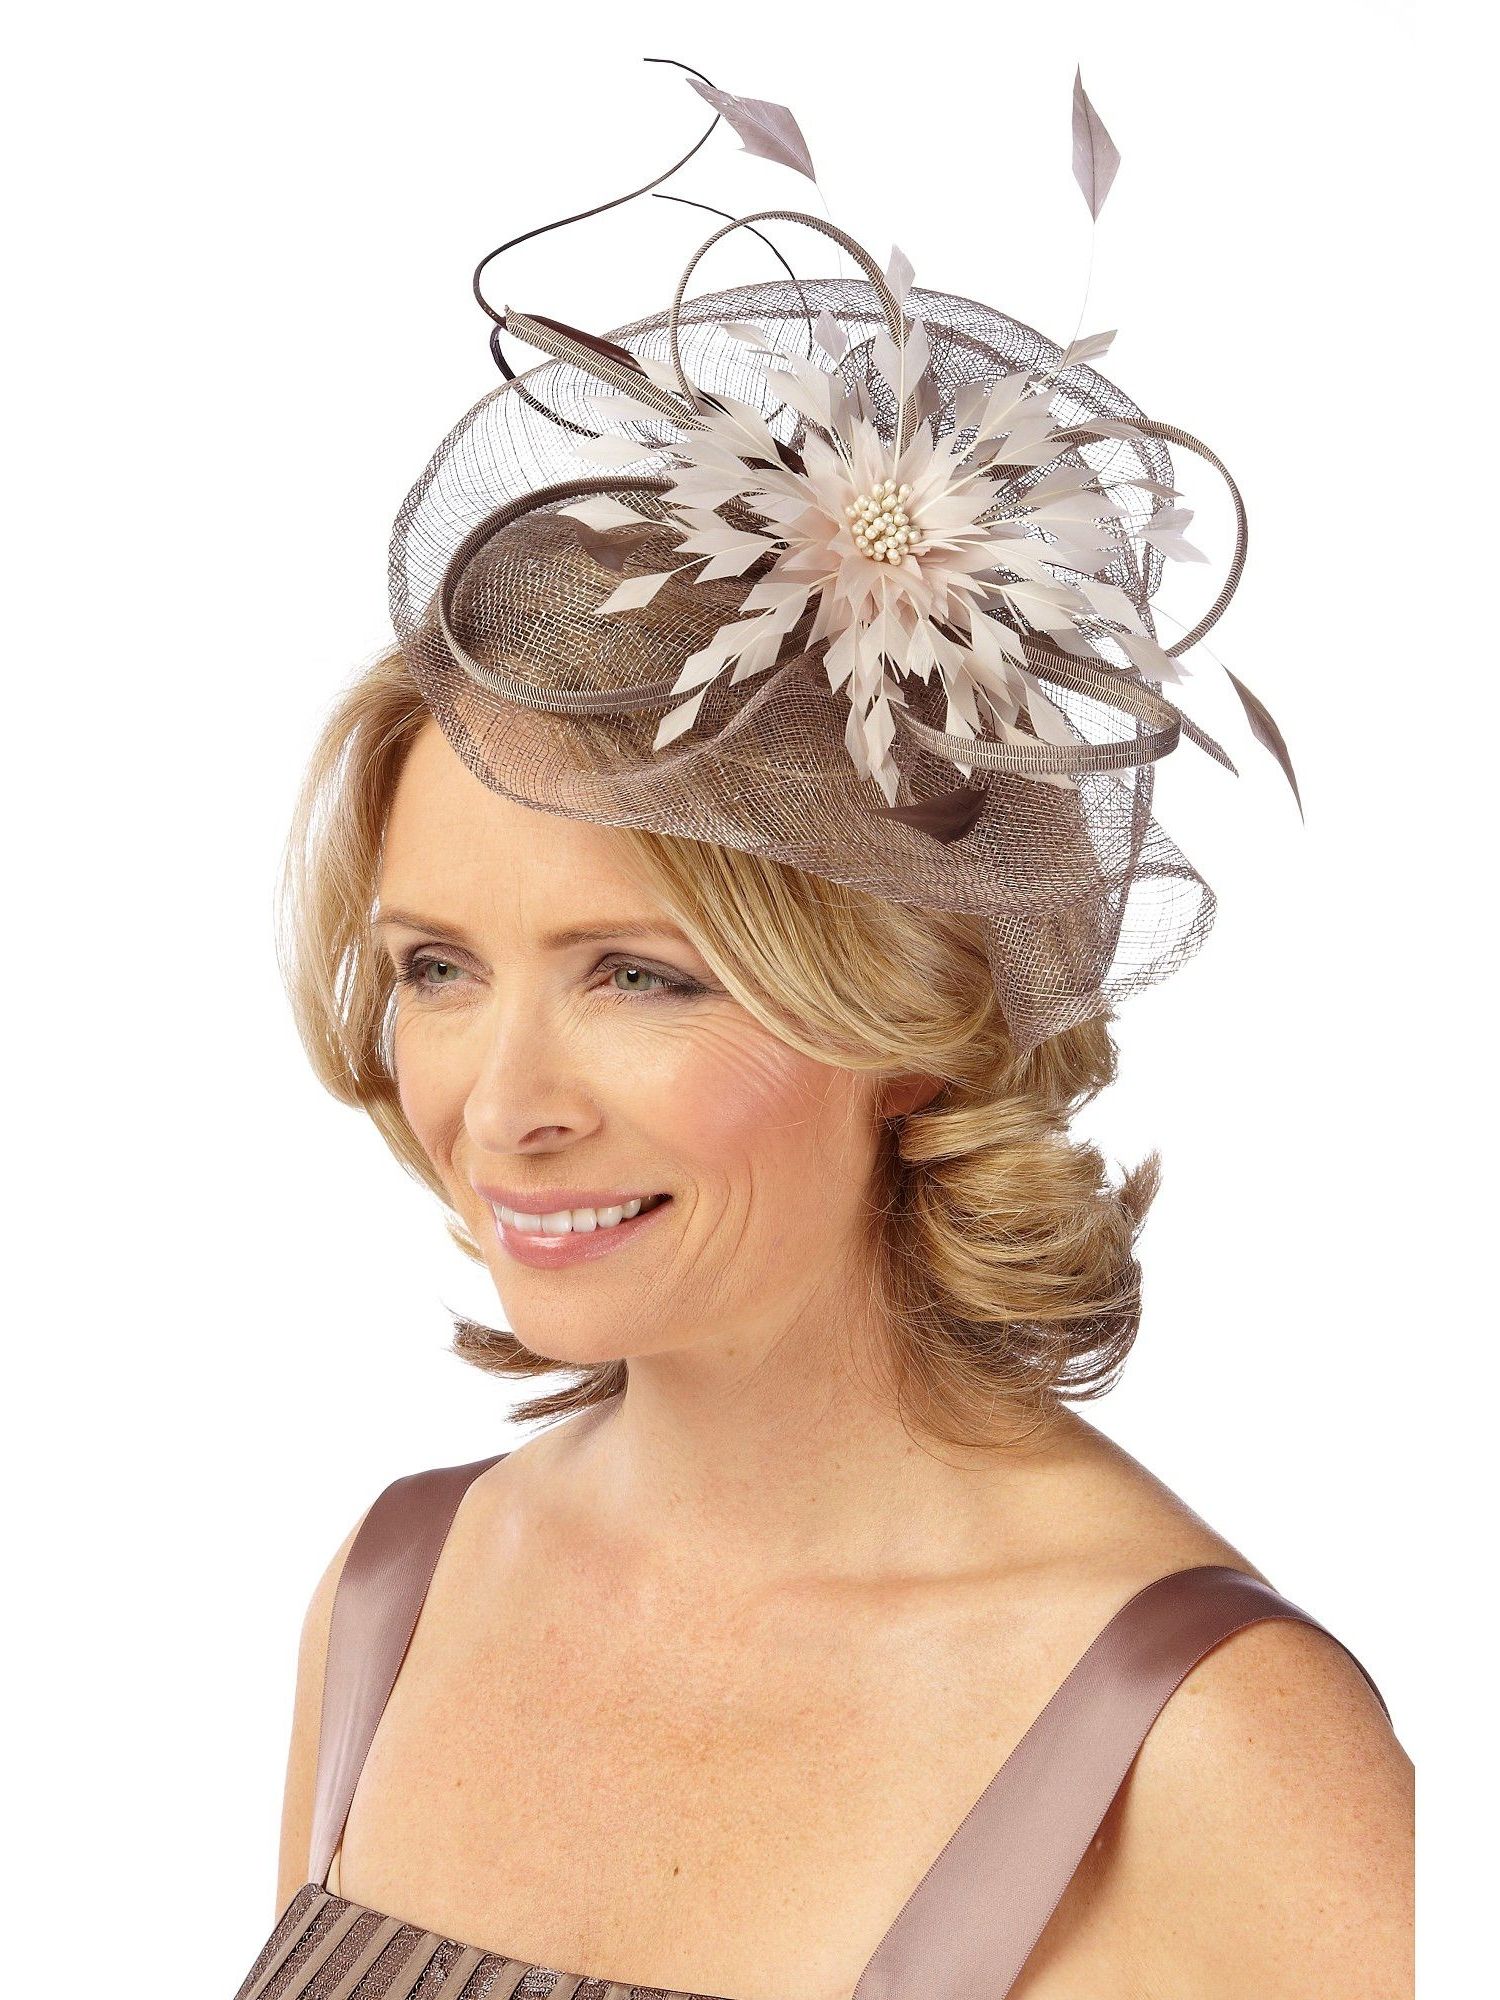 Midway Media Regarding Well Known Updos Wedding Hairstyles With Fascinators (View 11 of 15)